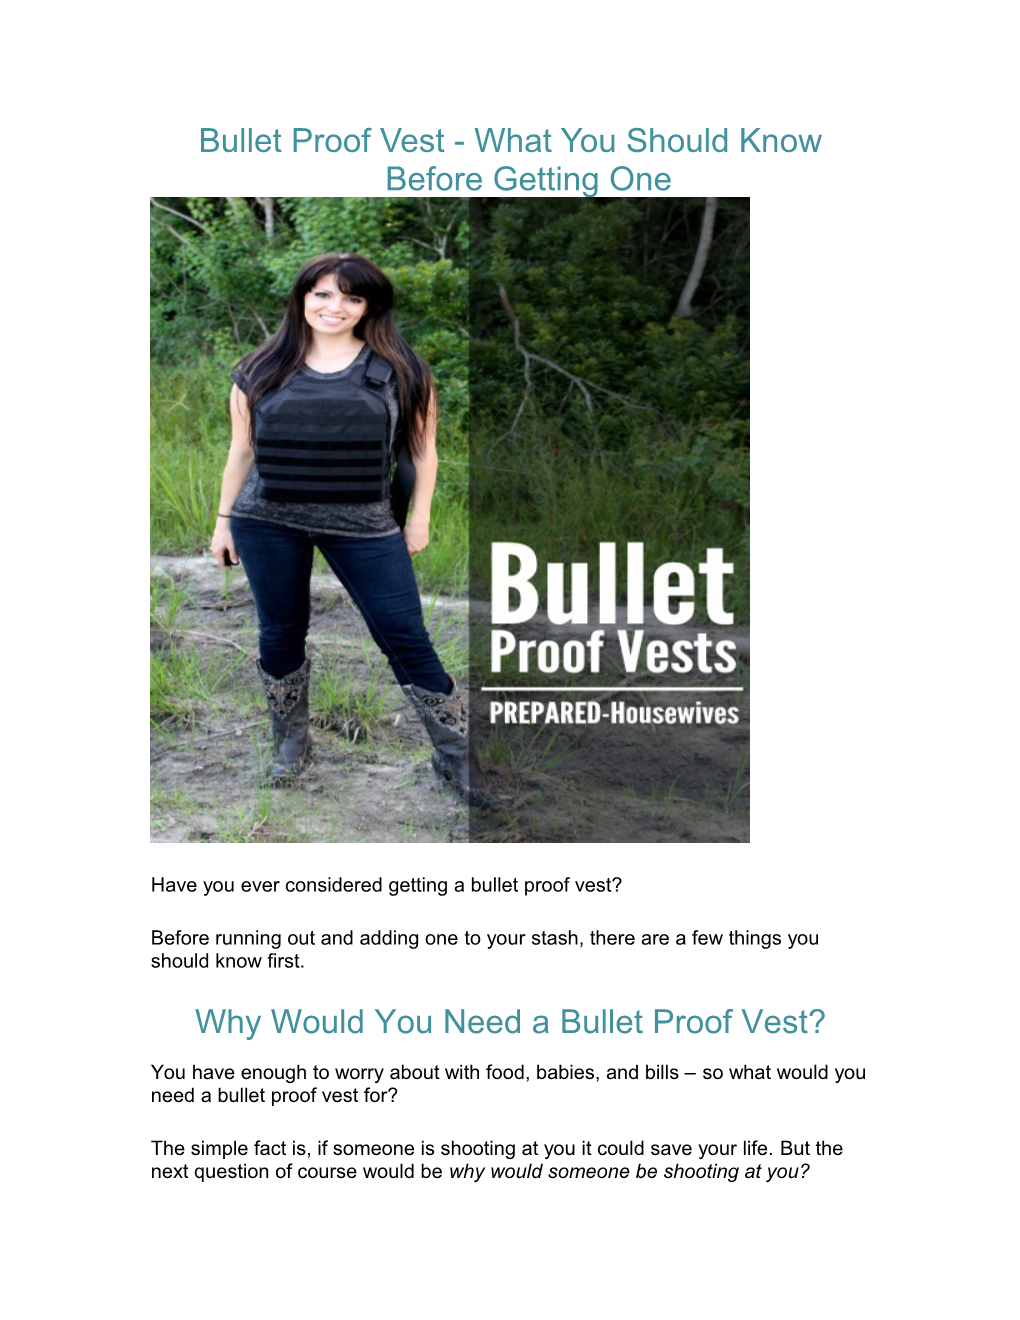 Bullet Proof Vest - What You Should Know Before Getting One